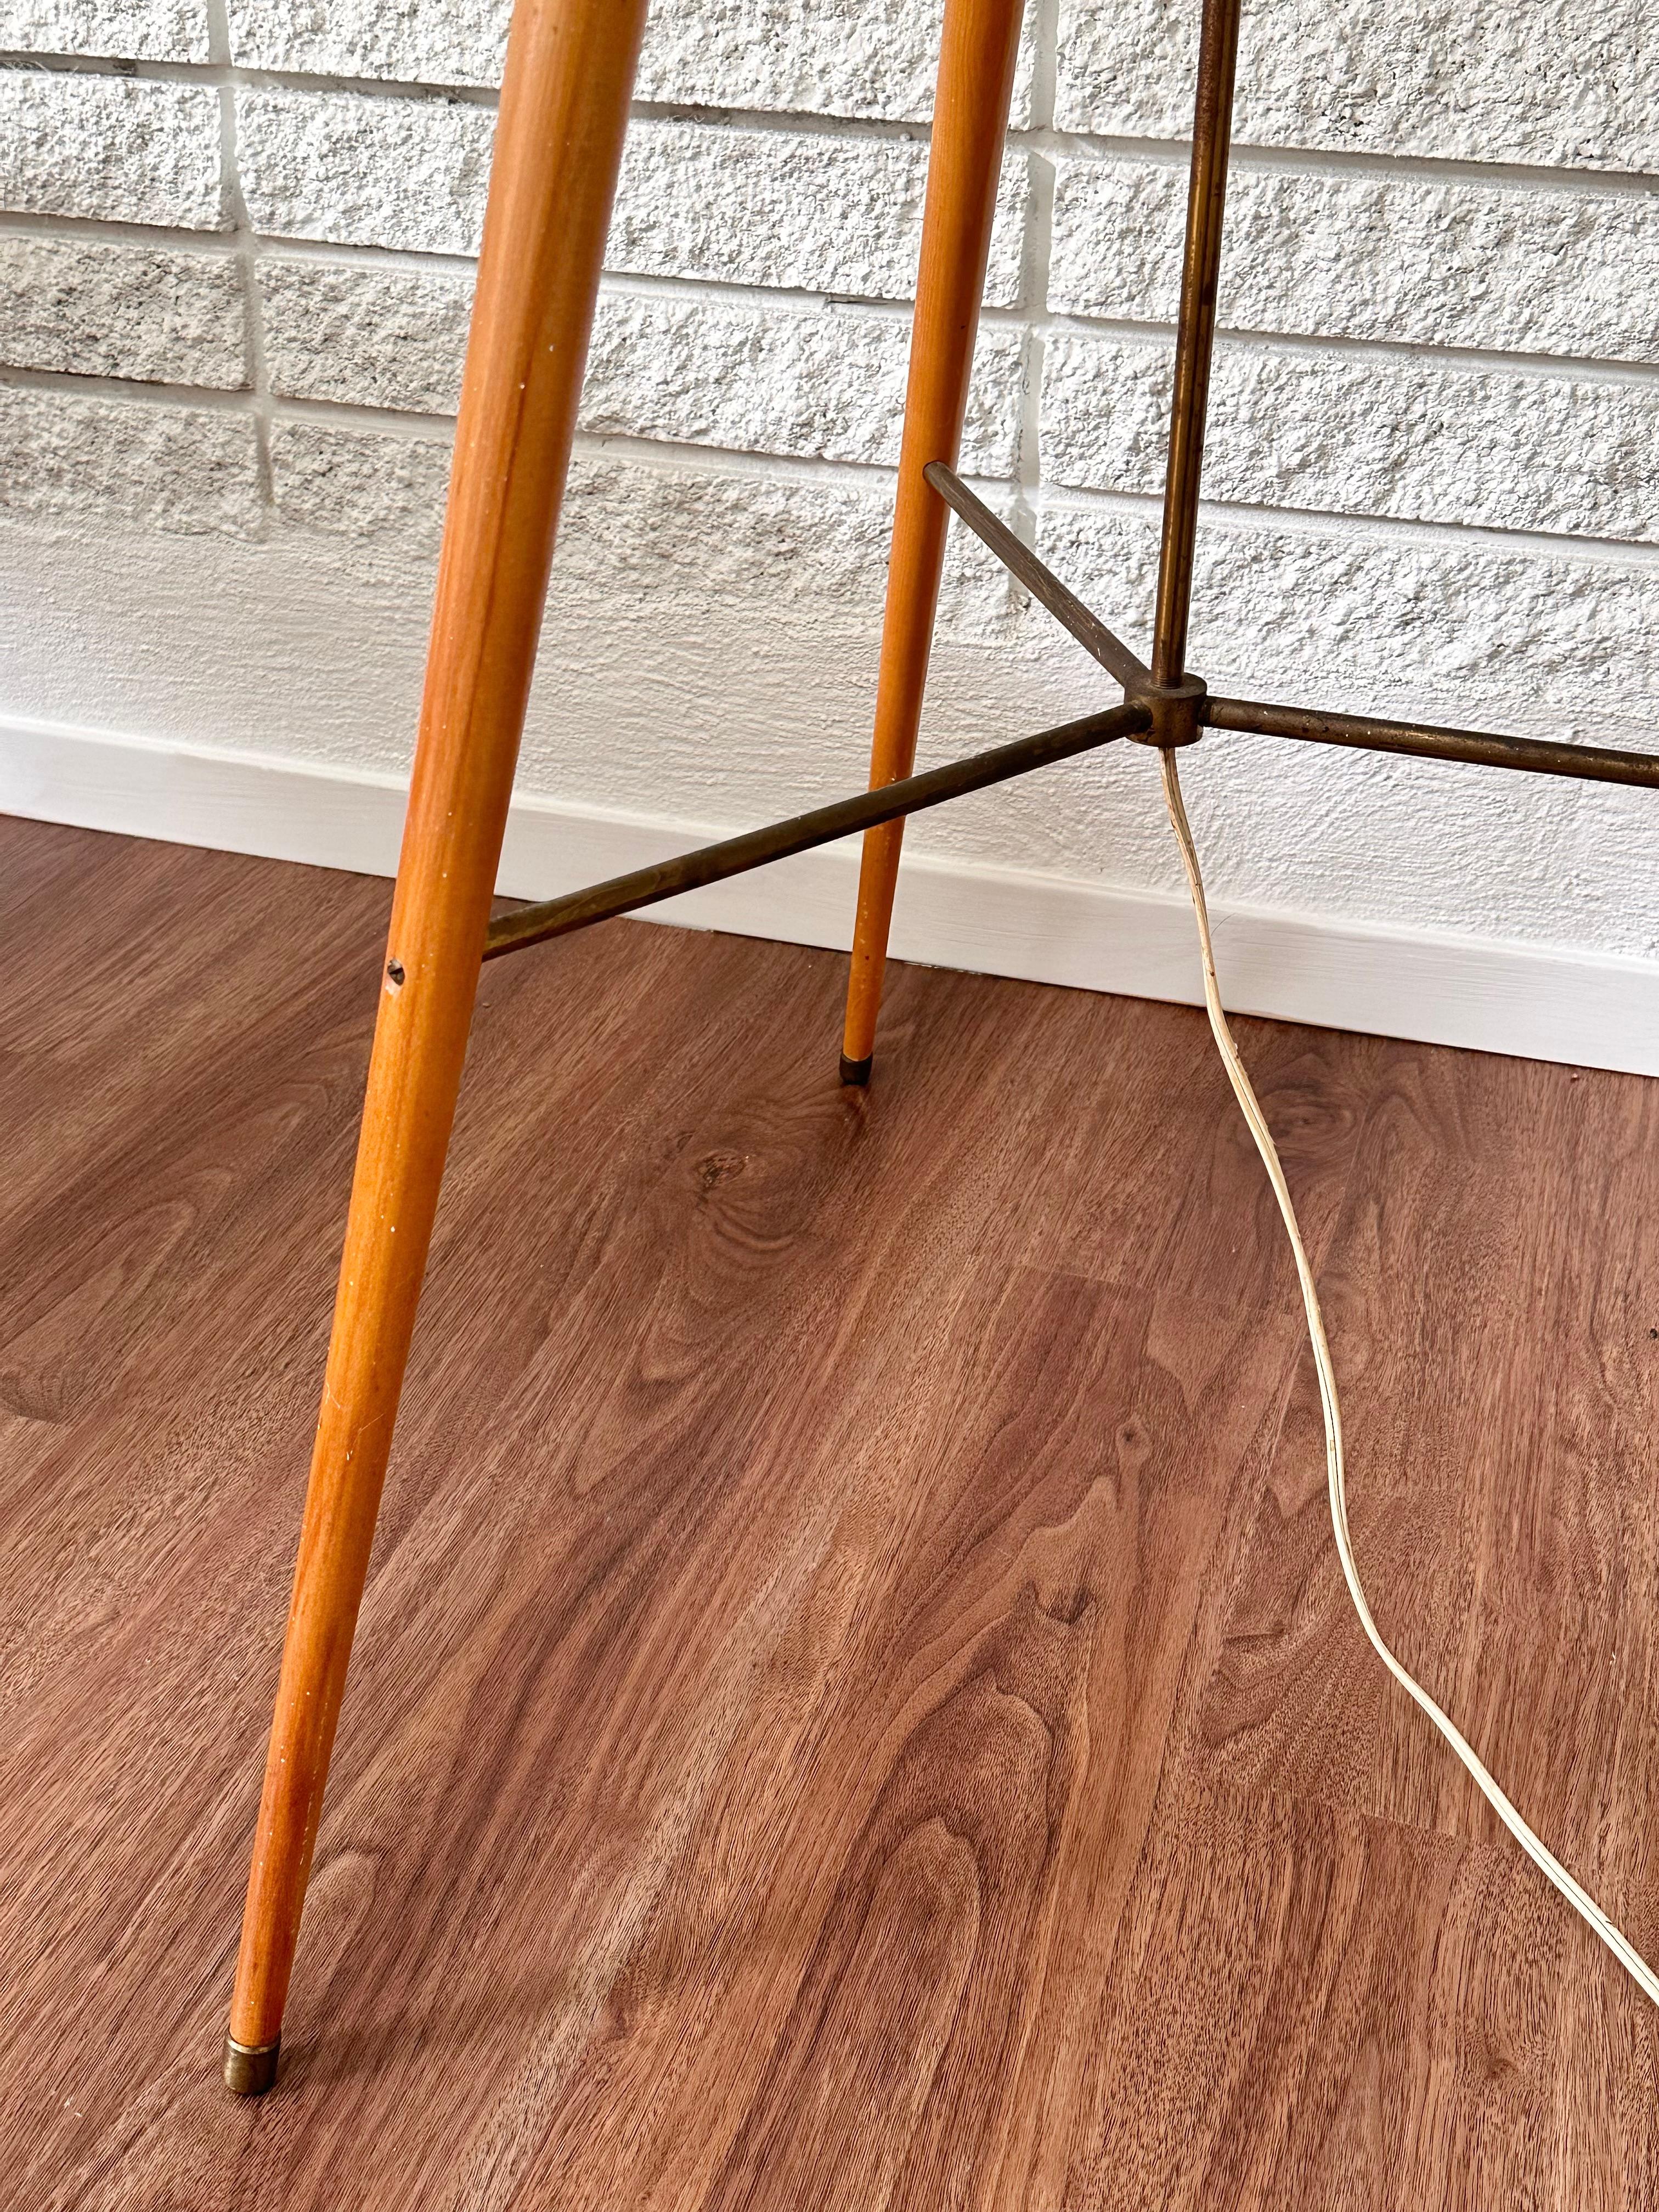 Extremely Rare George Nelson Bubble Floor Lamp Original Birch Tripod Base 1950s For Sale 1